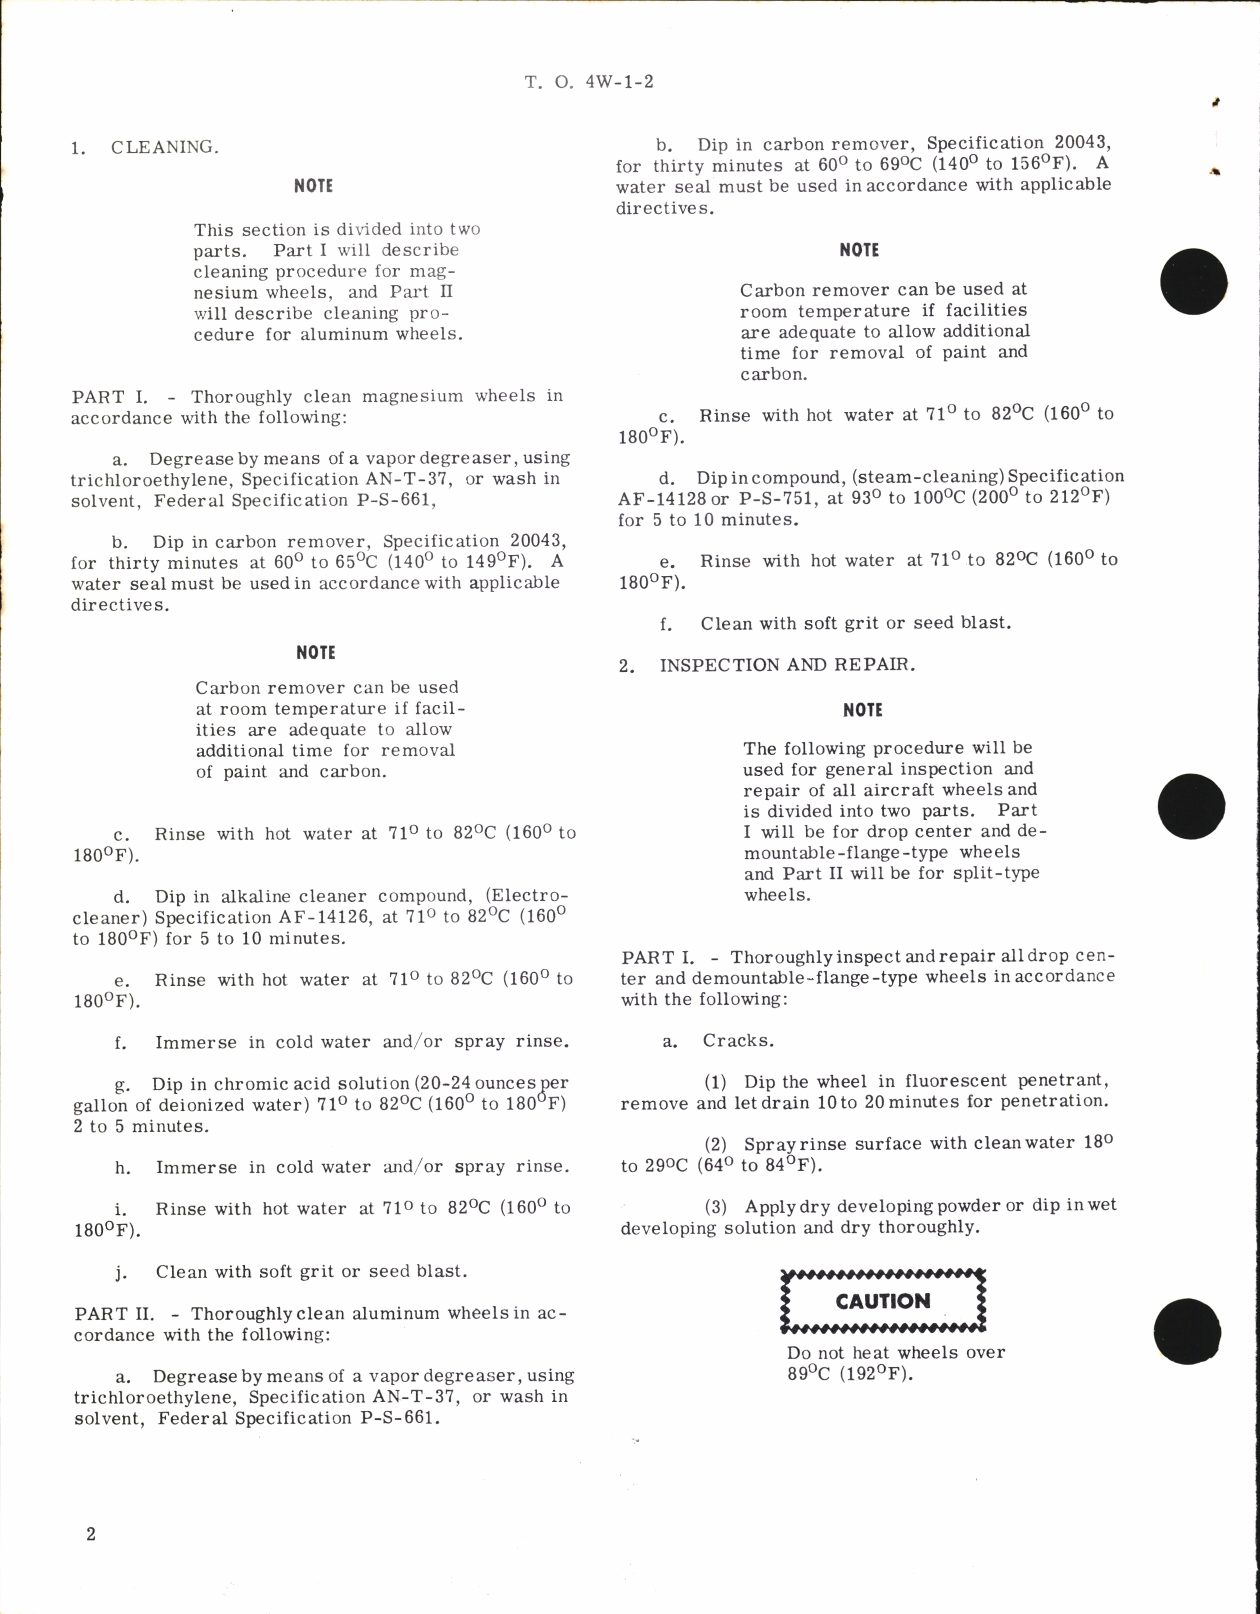 Sample page 2 from AirCorps Library document: Cleaning, Inspection, Repair, and Surface Treatment for All Aircraft Wheels